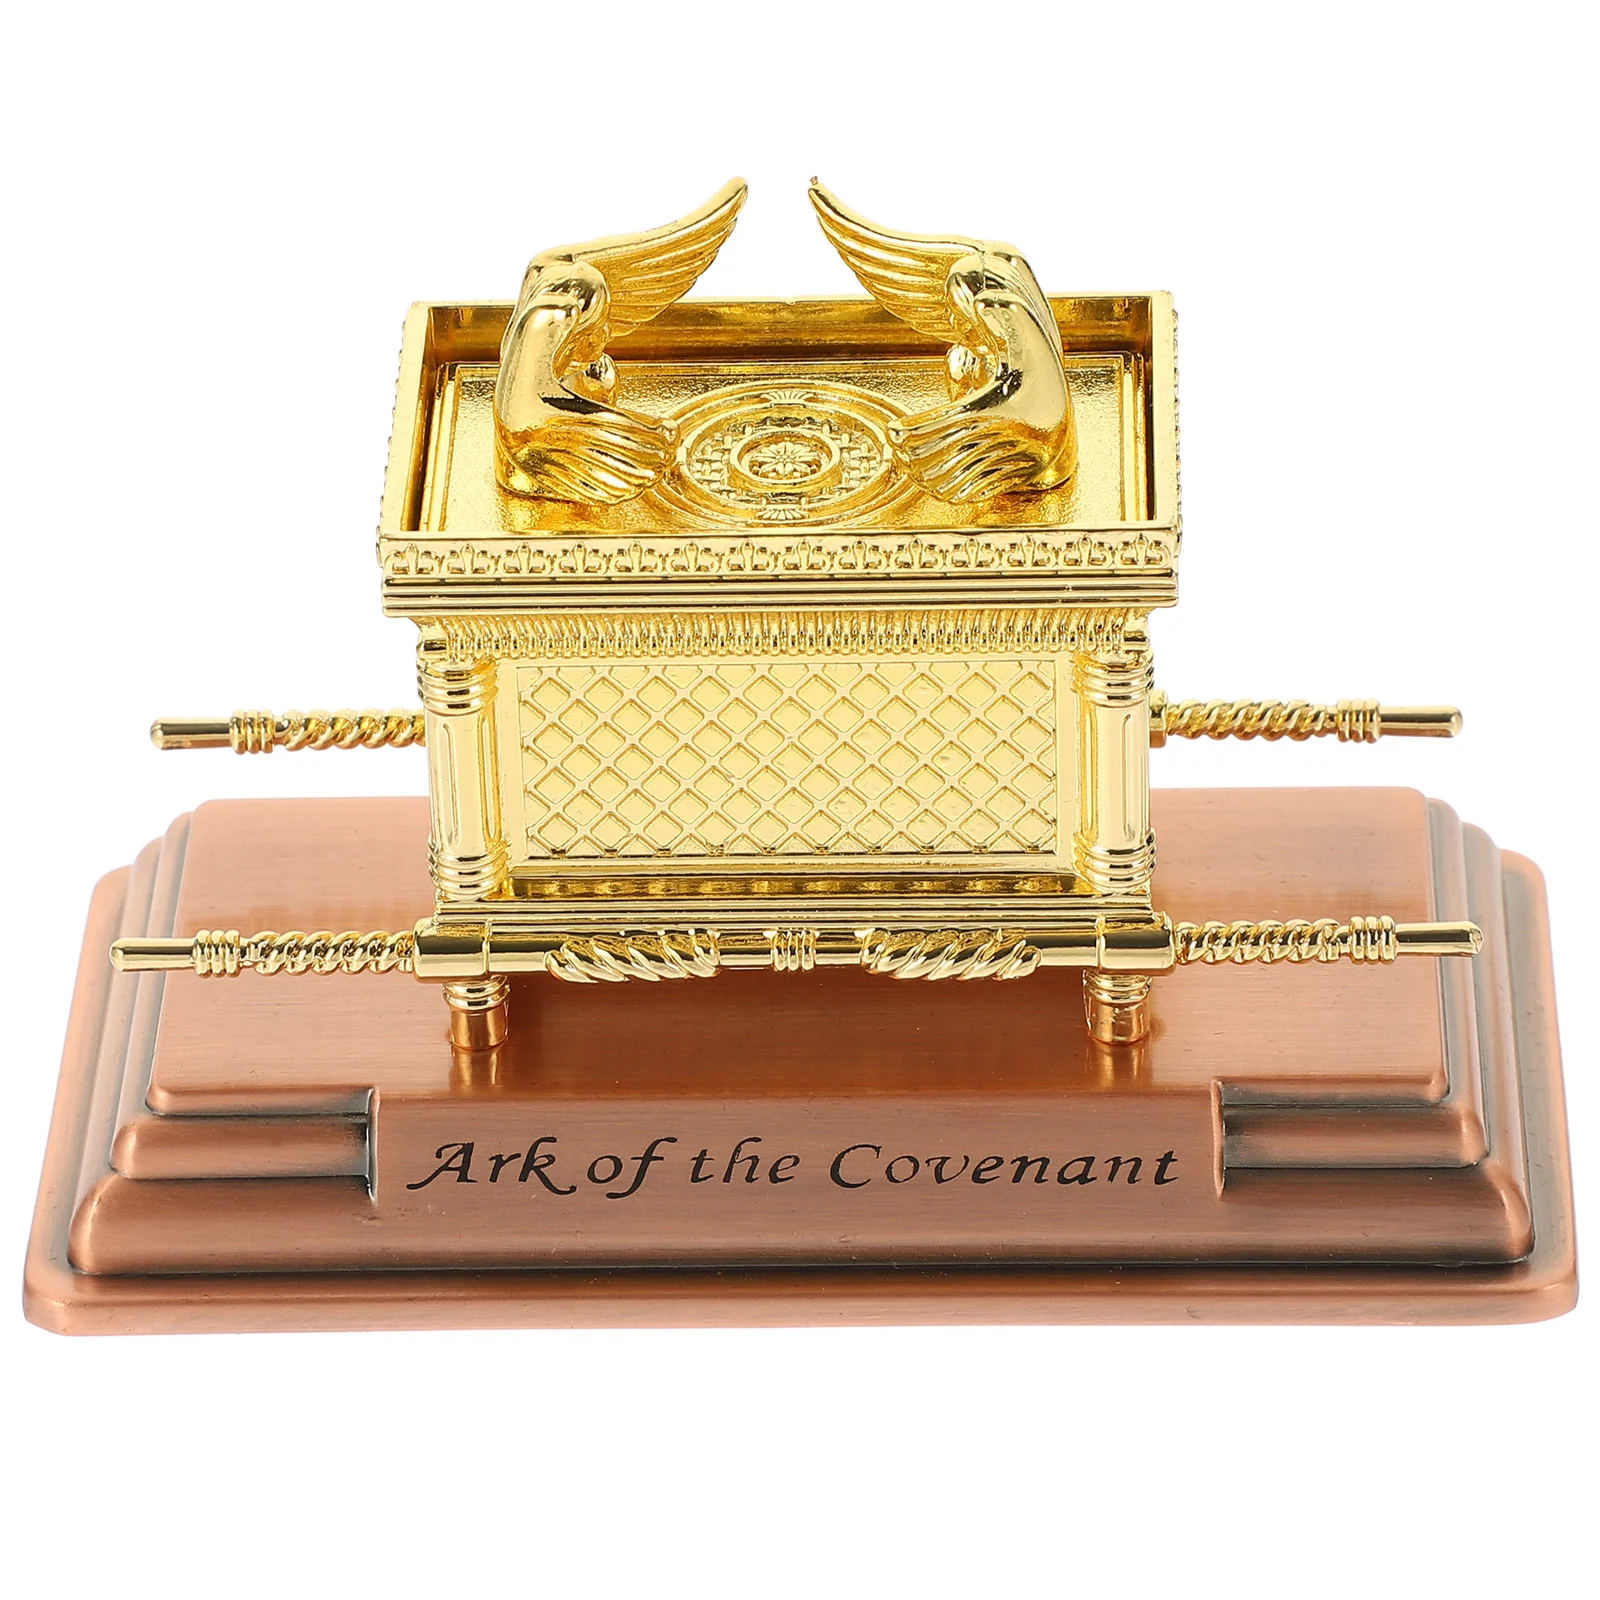 

Exquisite Religion Craft Model Household Zinc Alloy Ornament Church Ark of The Covenant Decor